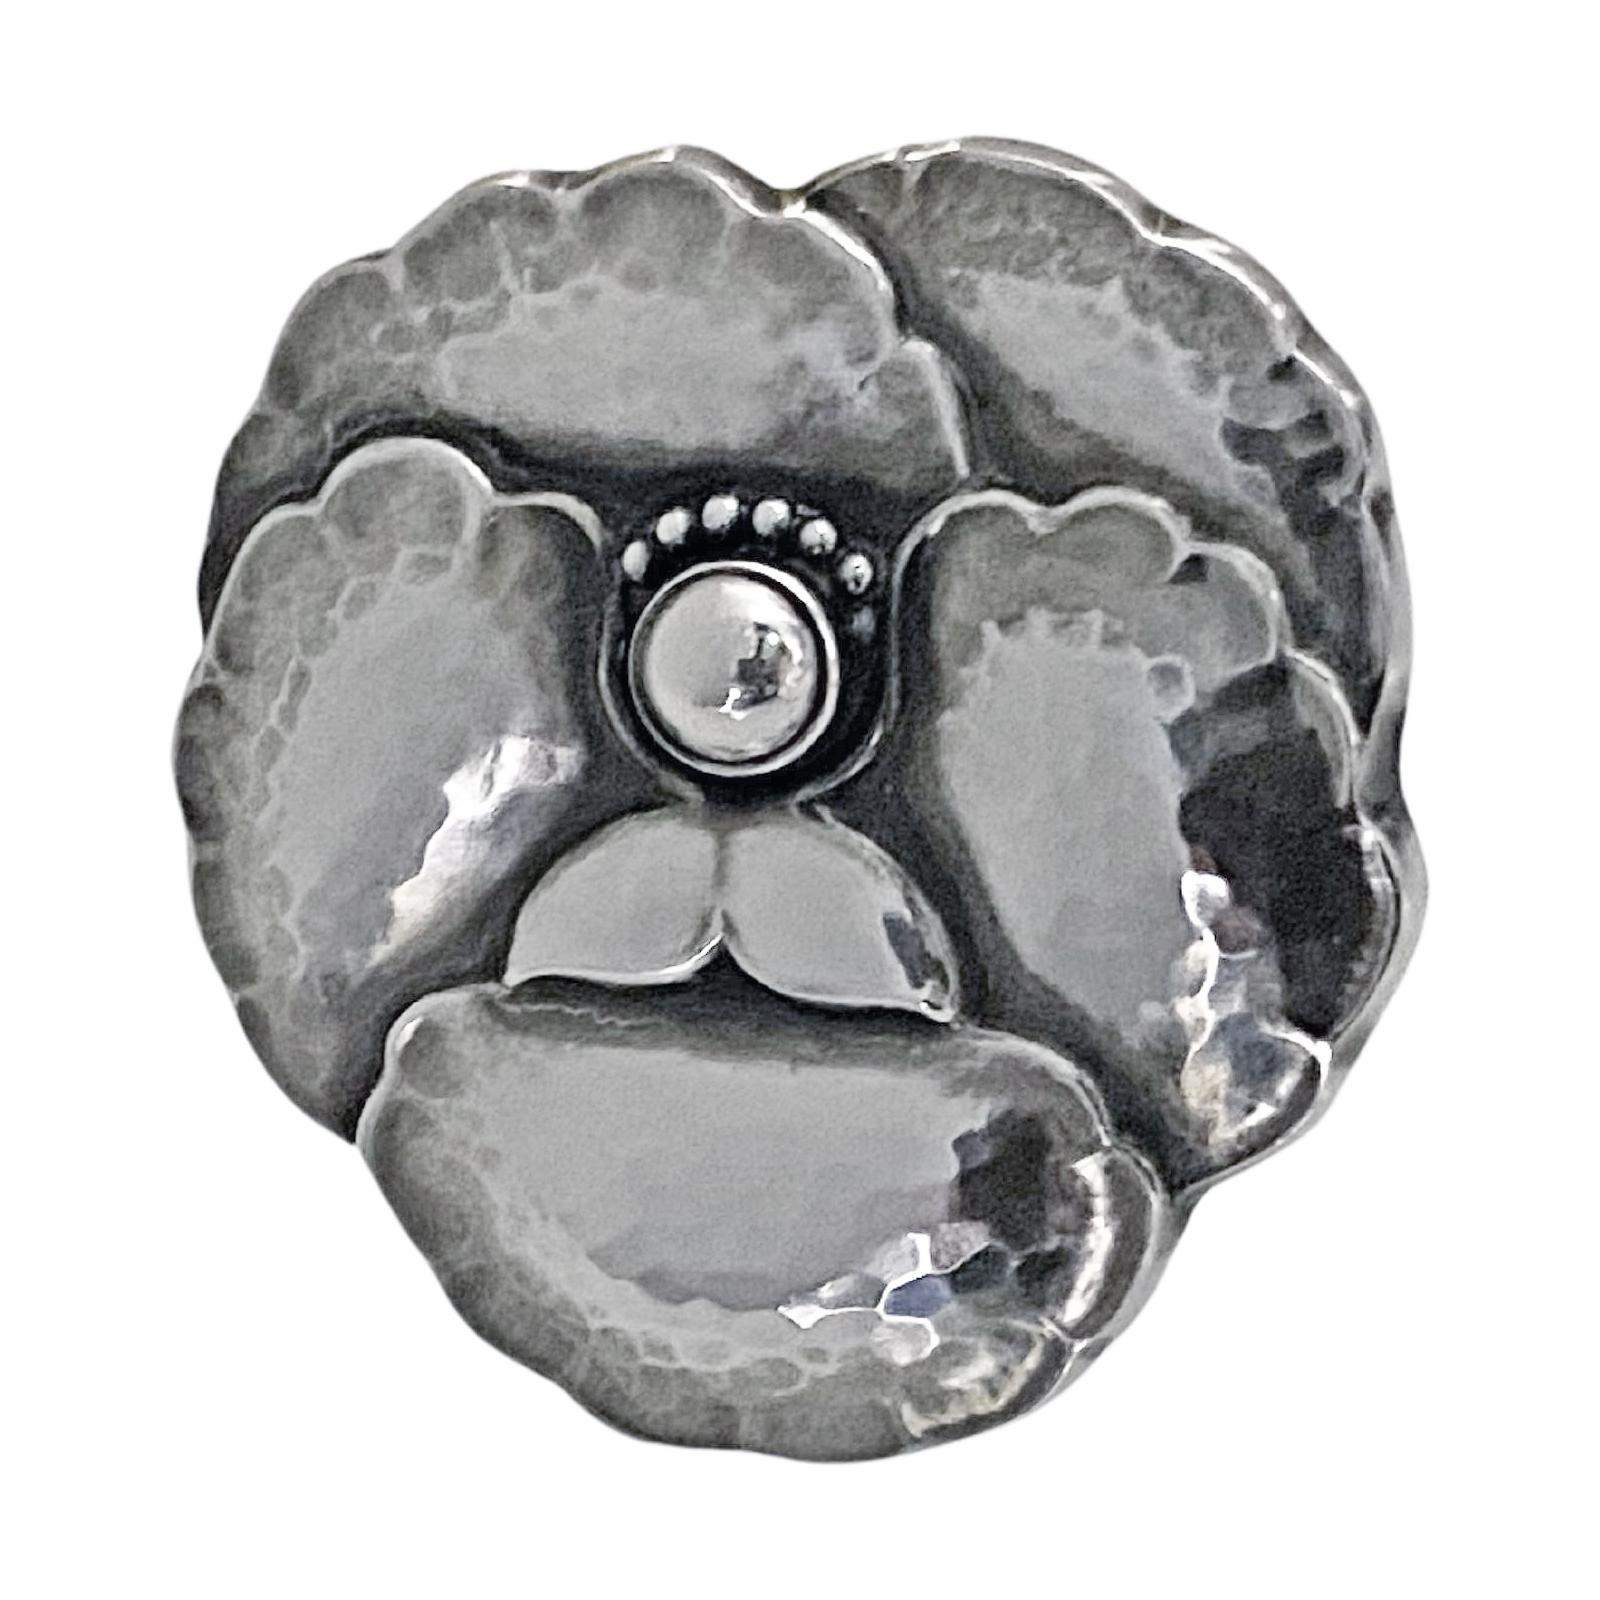 Georg Jensen Sterling Silver Flower Brooch # 113. Lightly hammered three-dimensional petal brooch, pin with safety catch at reverse. Originally designed by Georg Jensen. Full Georg Jensen marks and number 113. Measures: 1.60 x 1.60 inches. Item